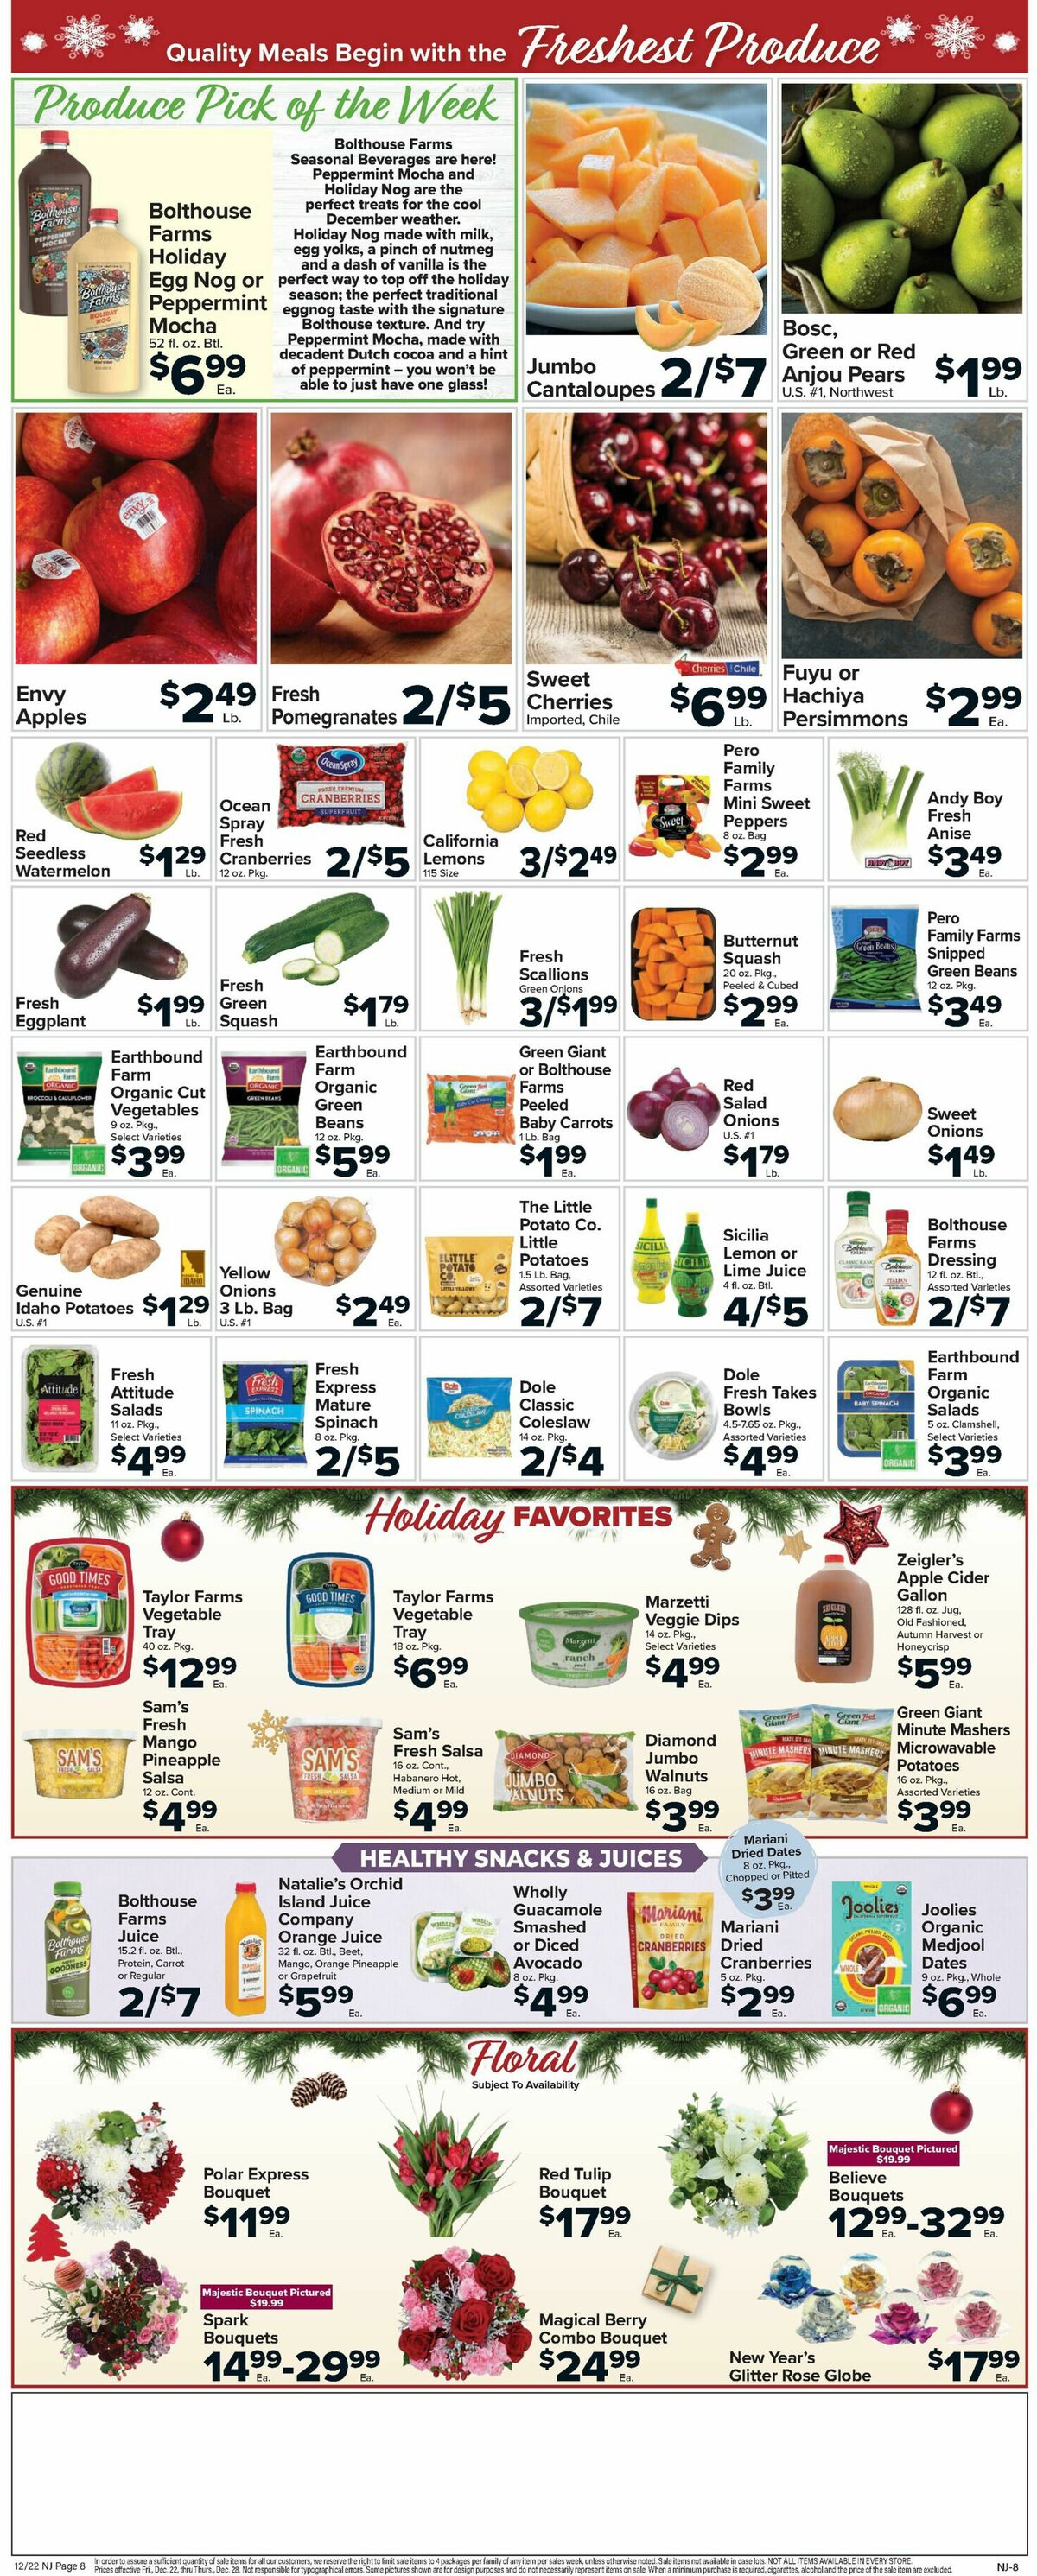 Food Town Weekly Ad from December 22